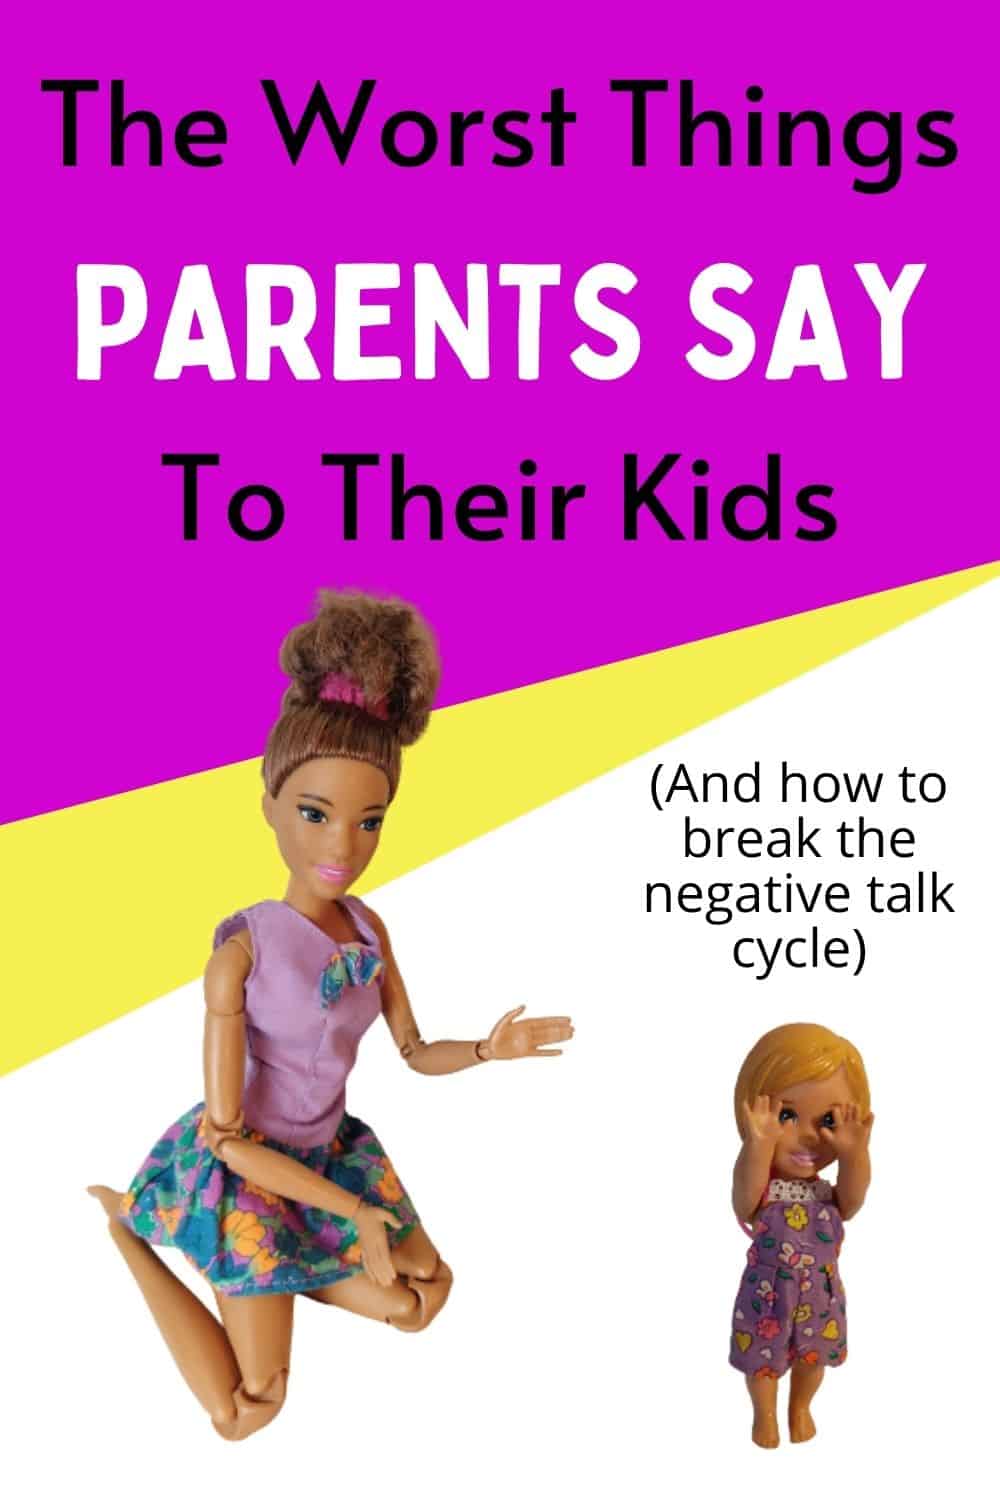 The worst things parents say to their kids (and how to break the negative cycle)